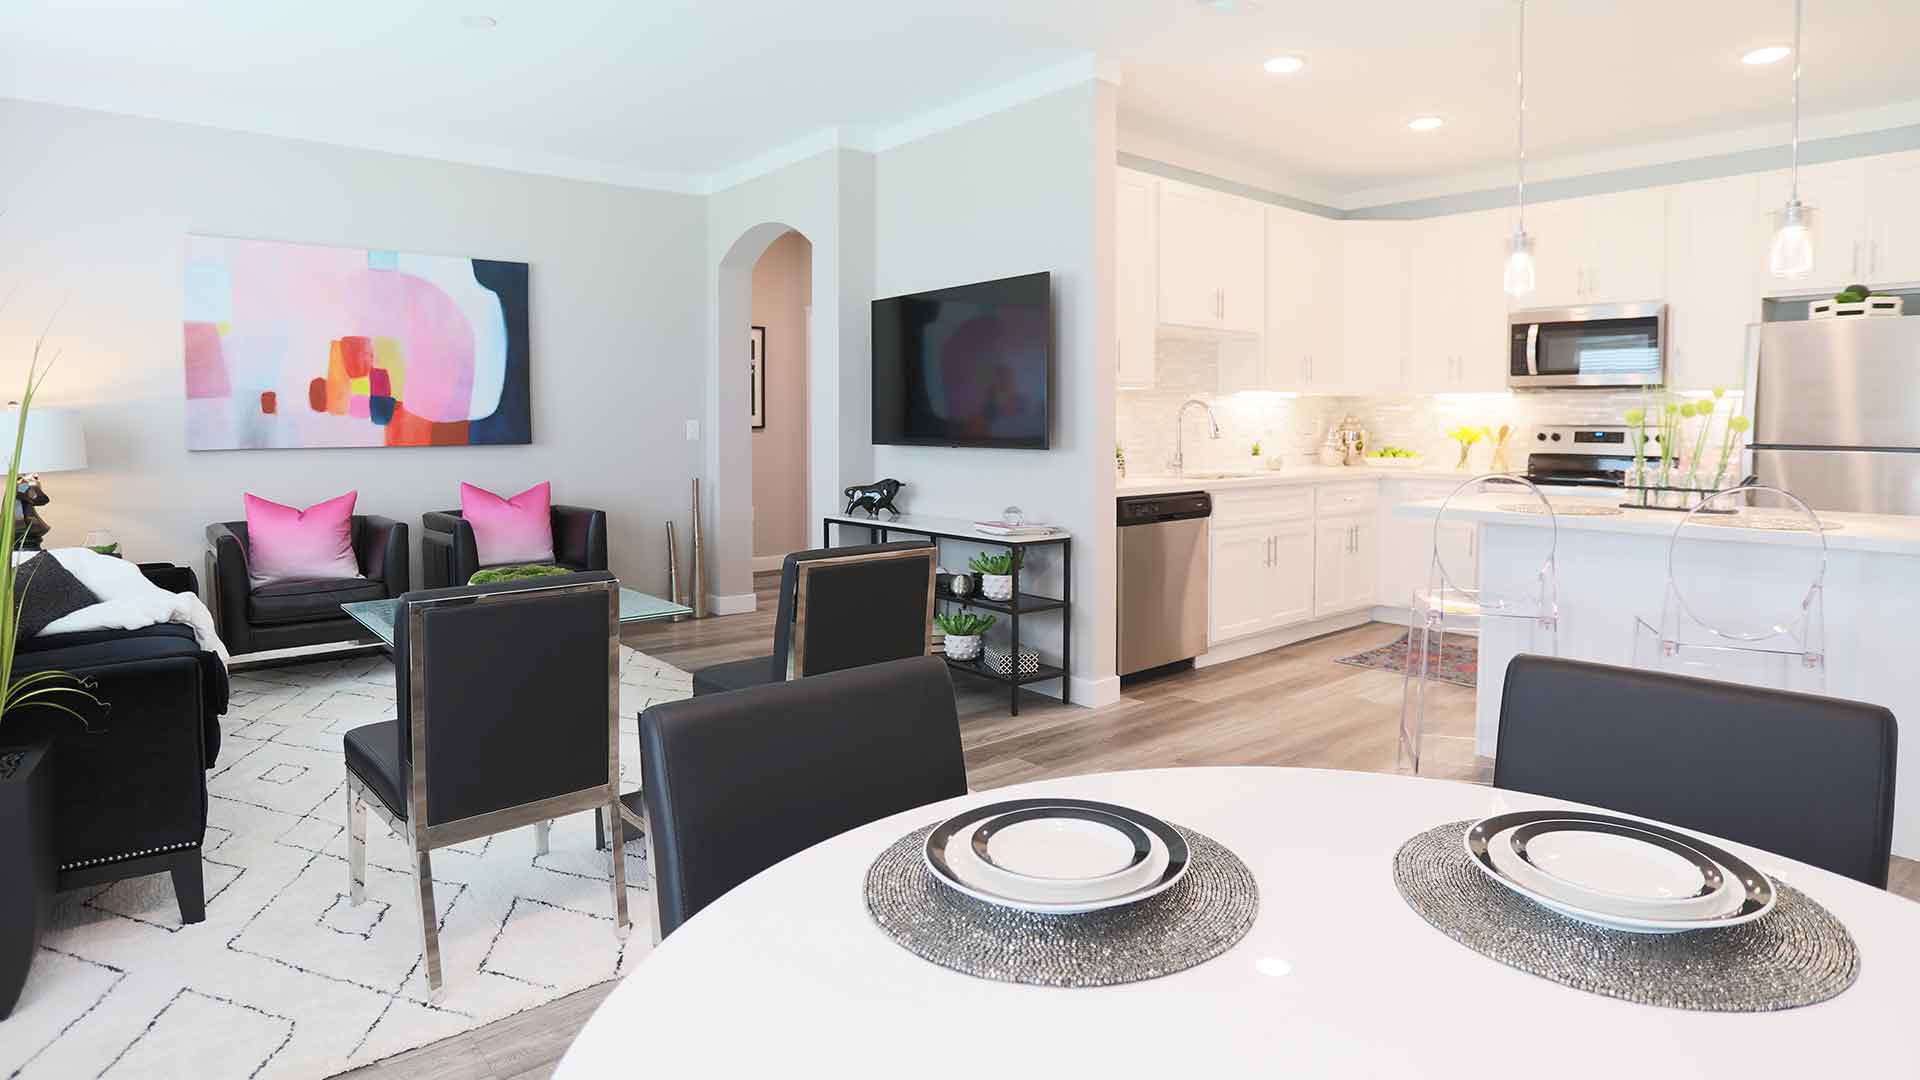 Open and vibrant living room space and kitchen at Greyson on 27 apartments.